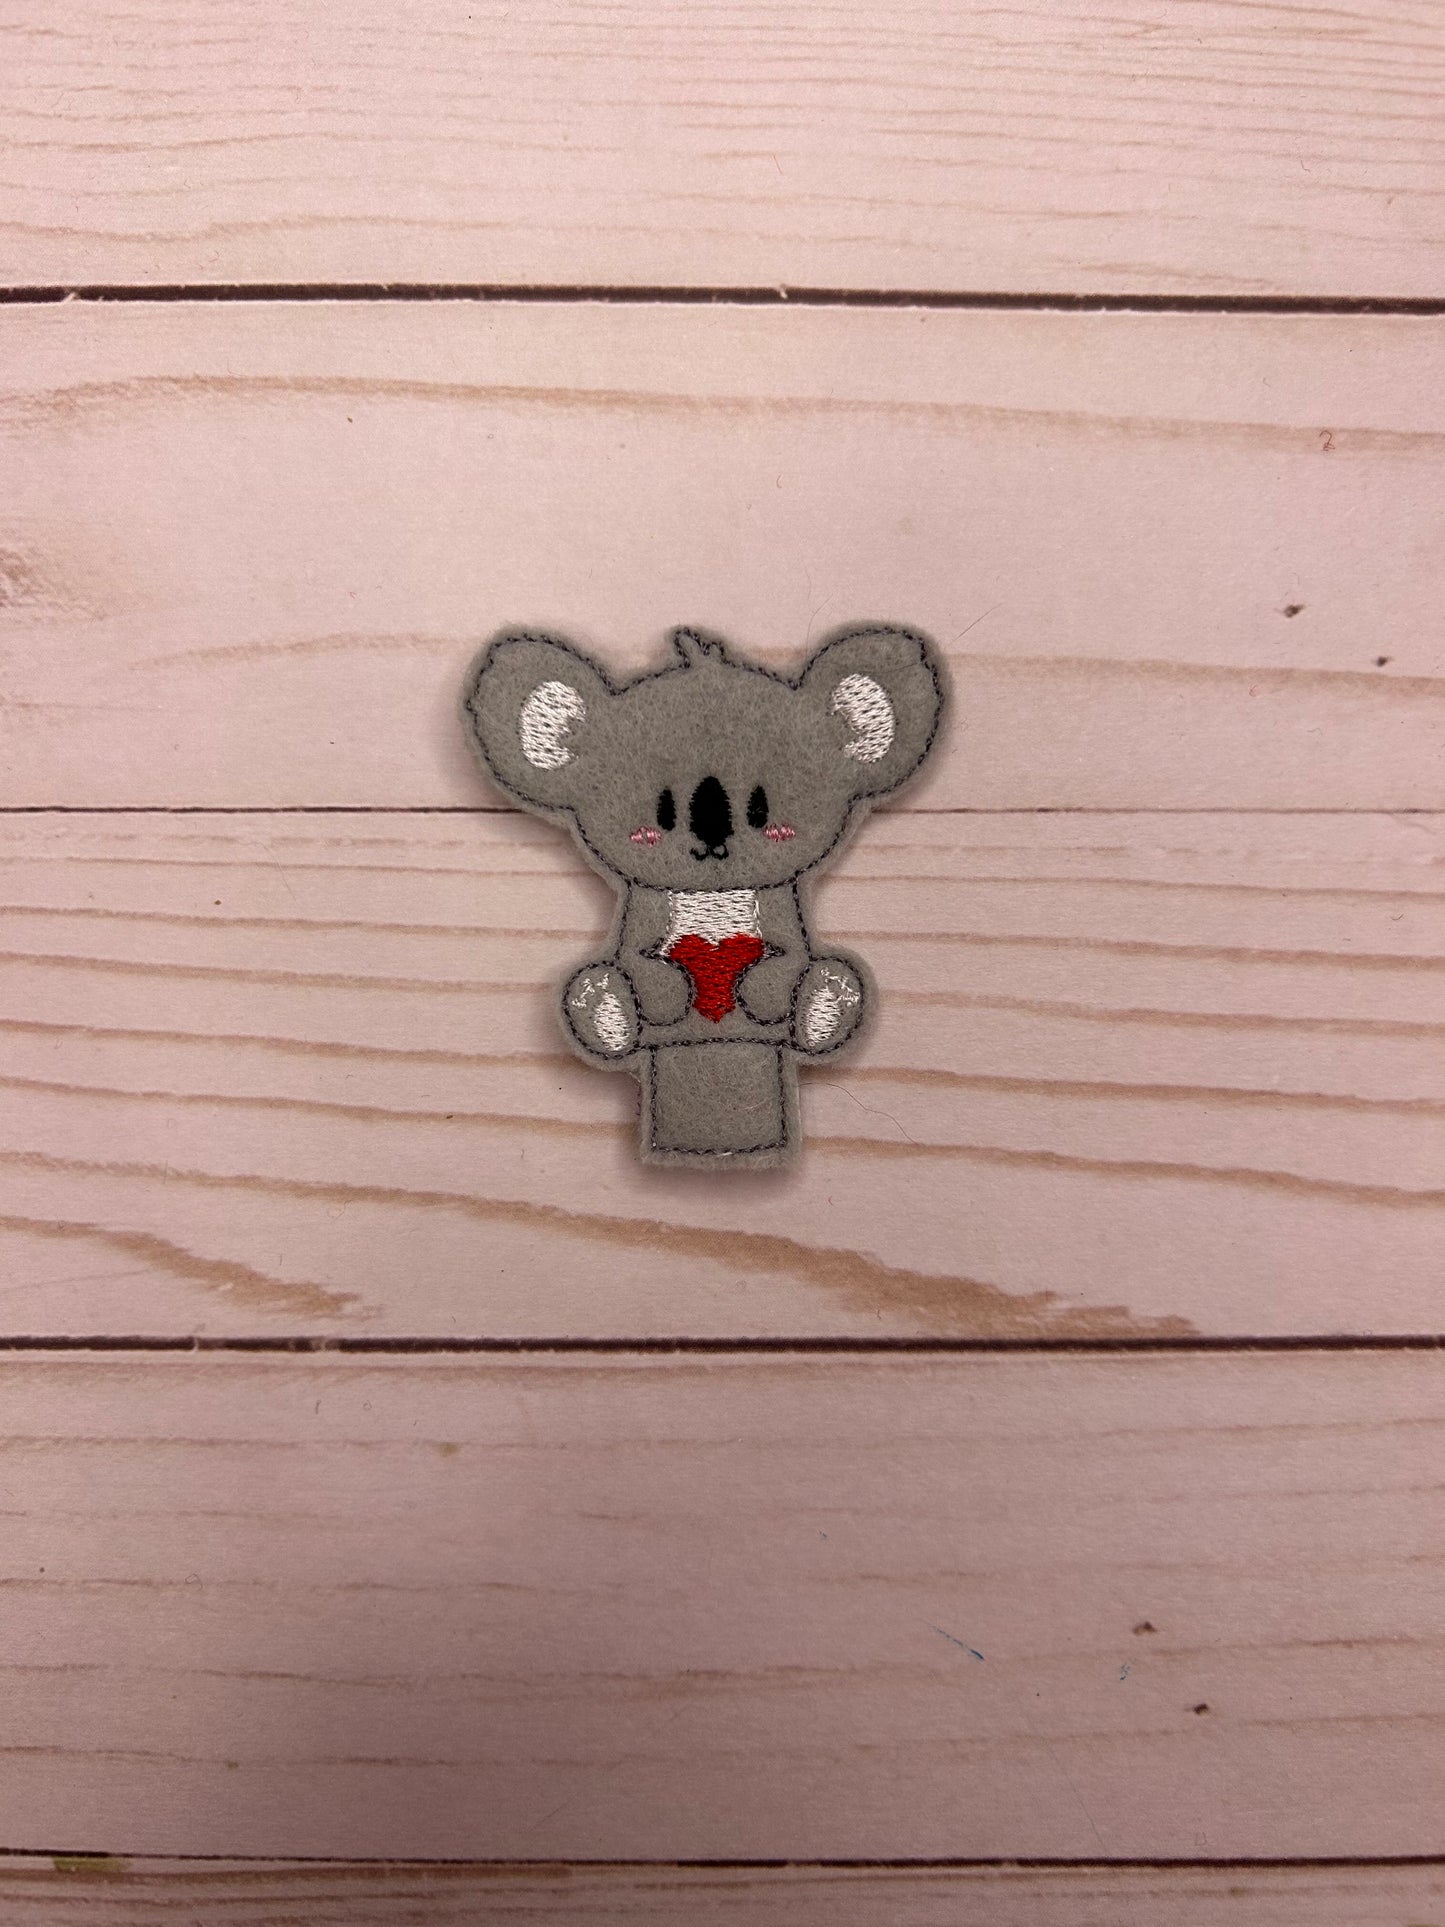 Koala Heart Pencil Topper | Embroidered Toppers, School Accessories, Back To School, Office Supplies, Pen Topper, School Supplies, Party Favor